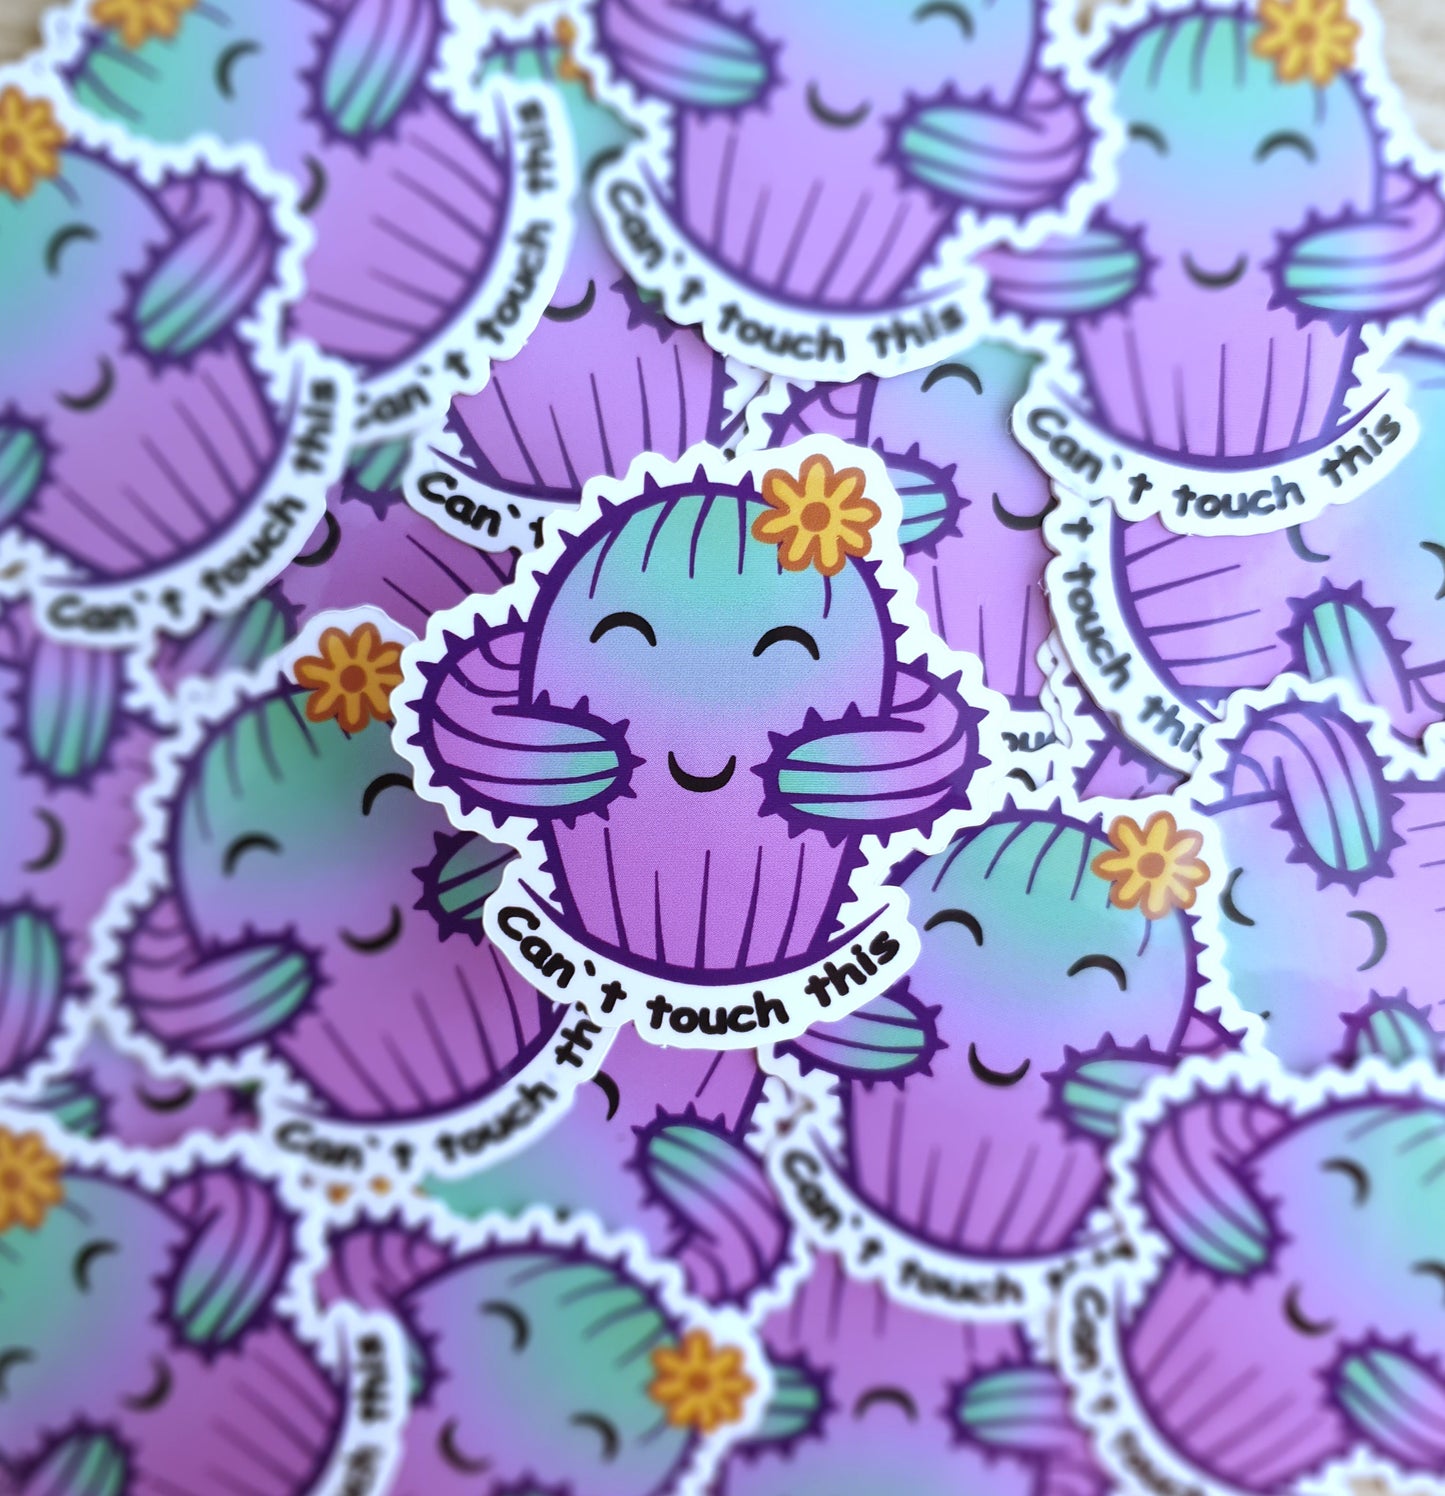 Cactus Sticker - "Can't touch this" - blue and purple